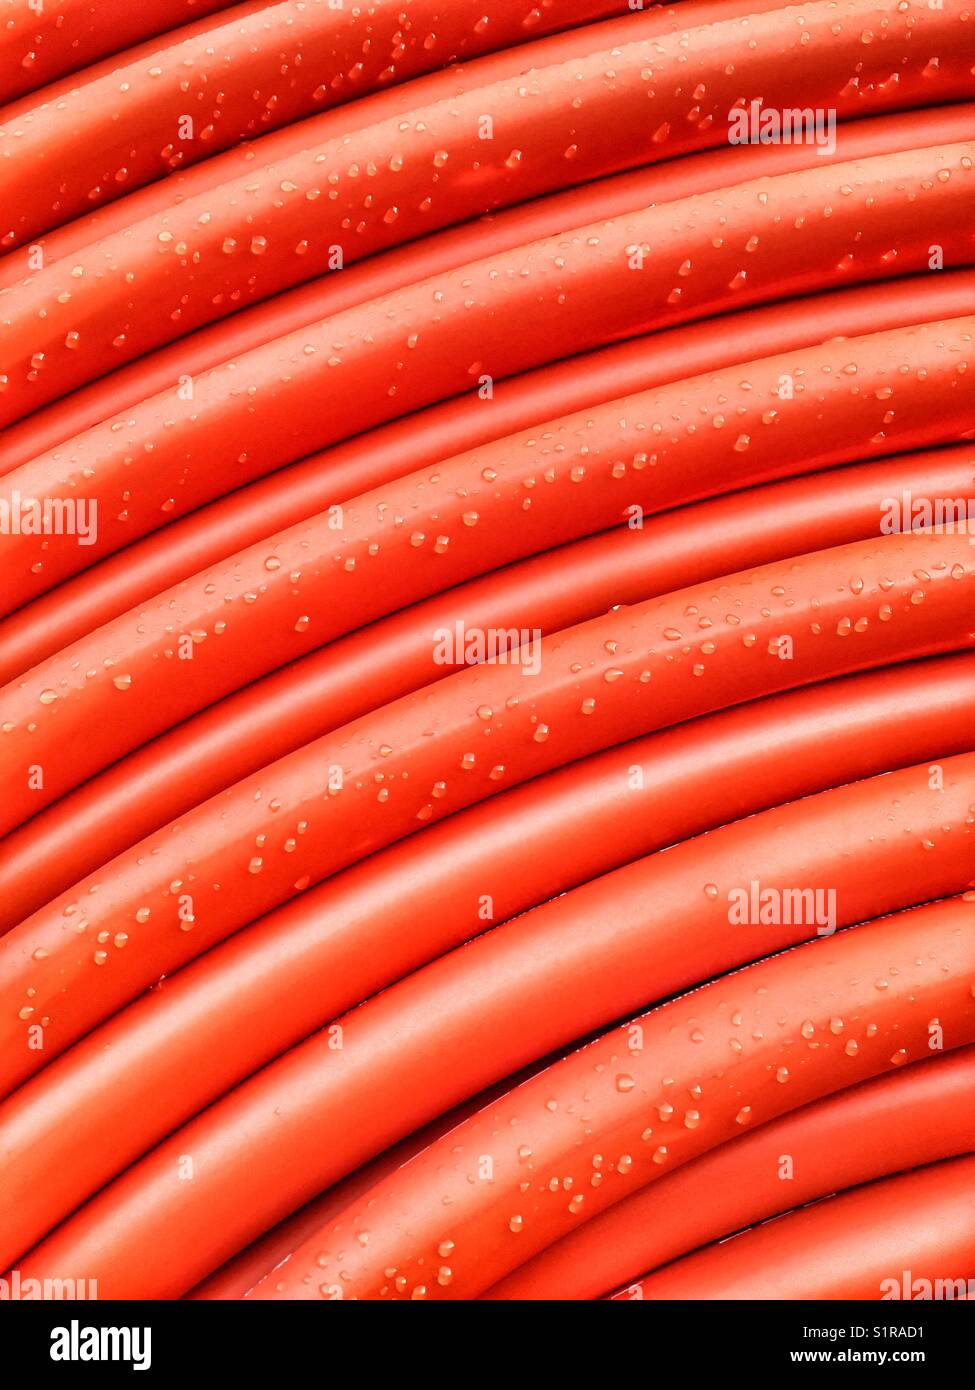 Abstract shot of a orange pipe roll with rain drops Stock Photo